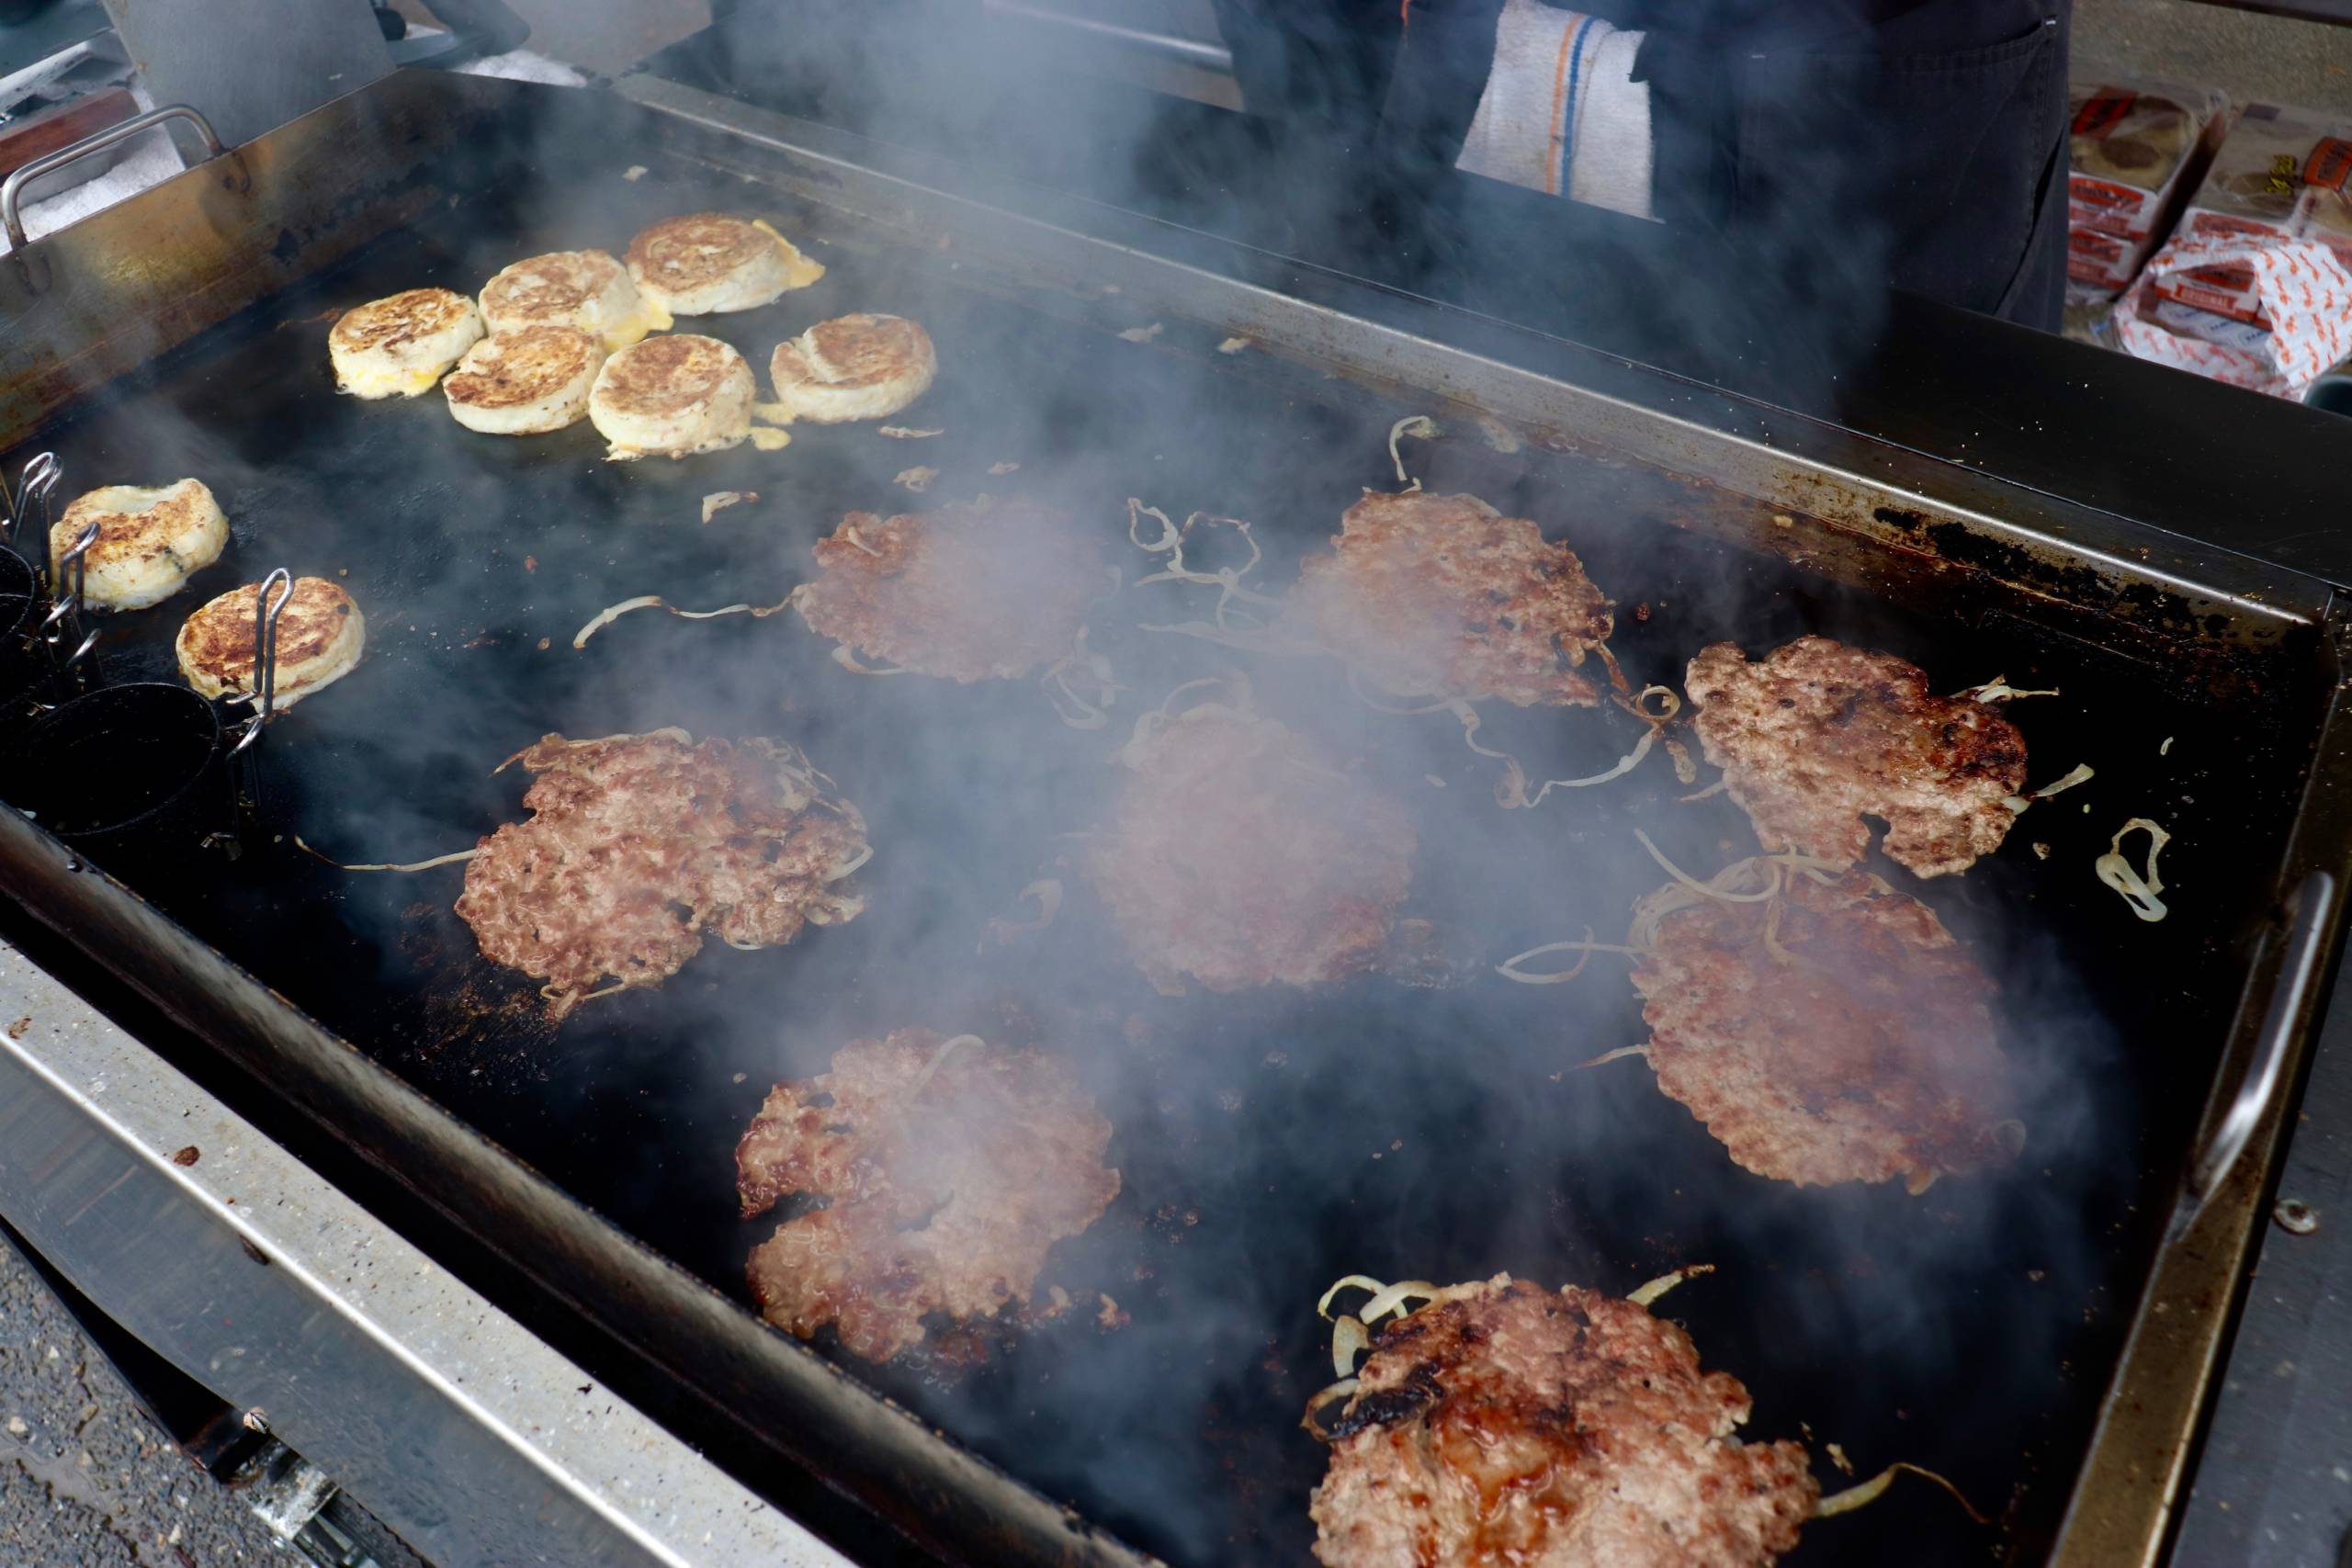 a portable griddle sizzles with sausage patties, onions and eggs